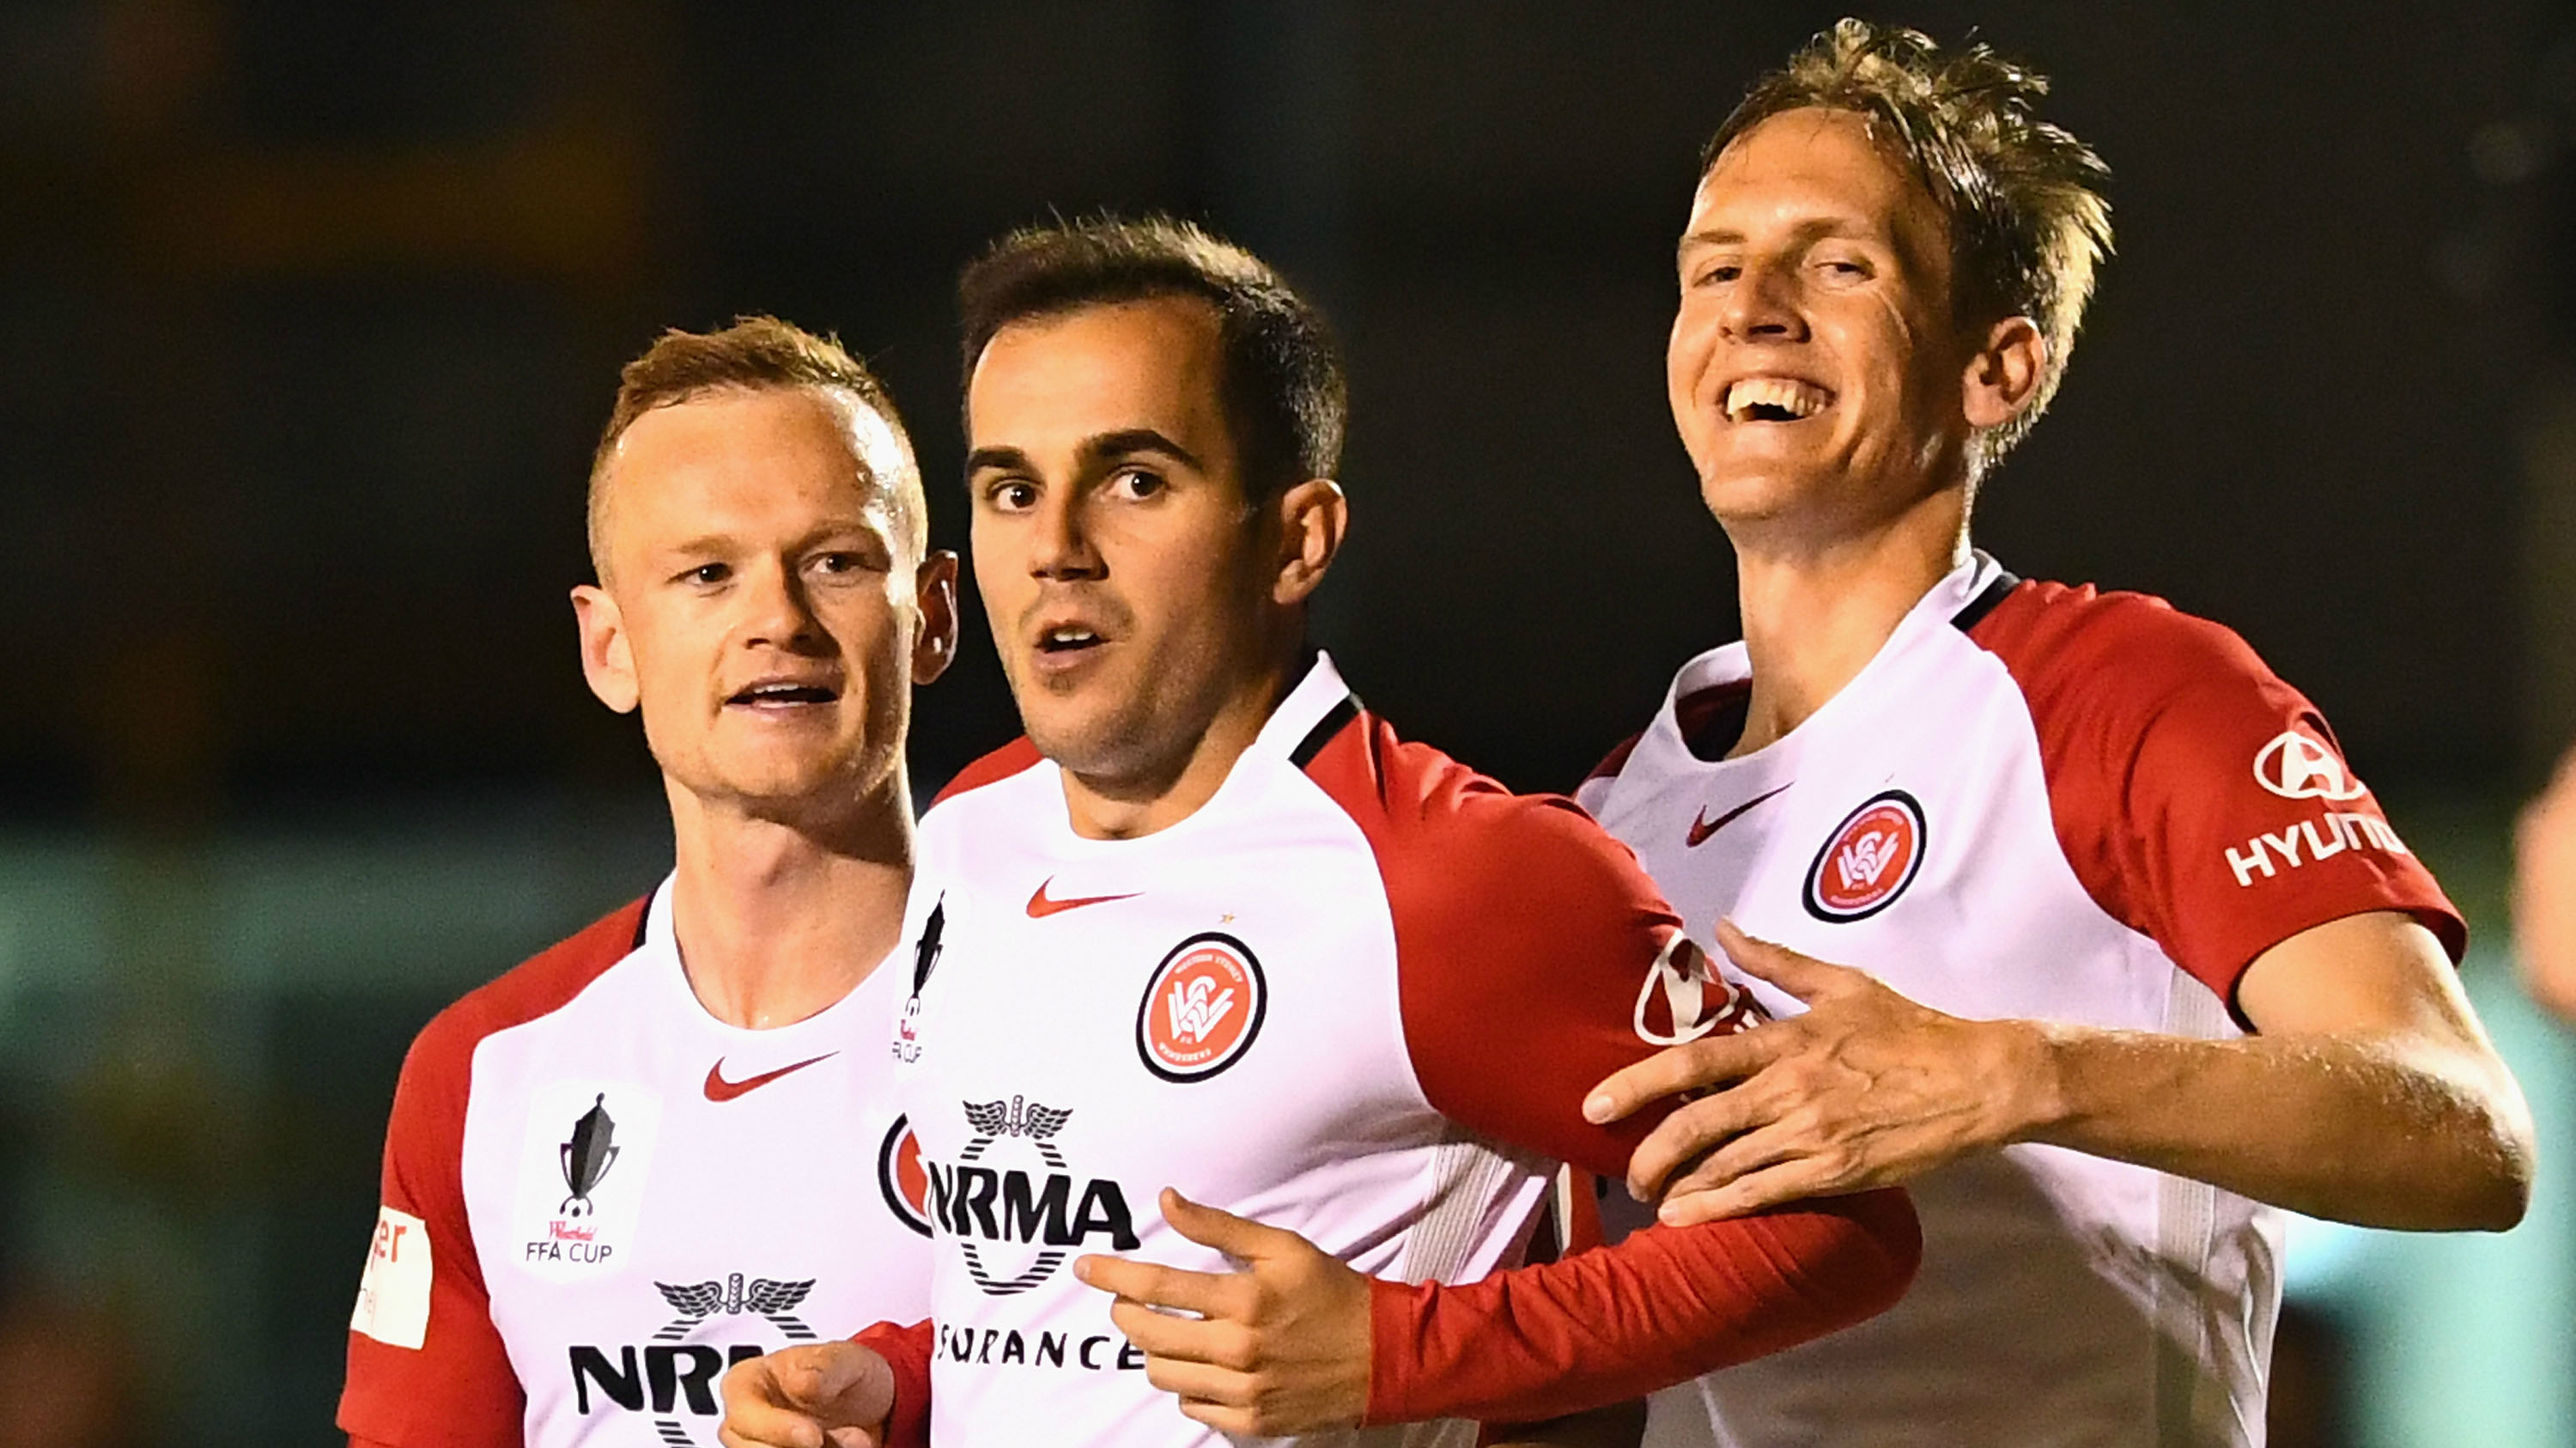 Wanderers players celebrate one of their four goals in the big win over Bentleigh Greens.